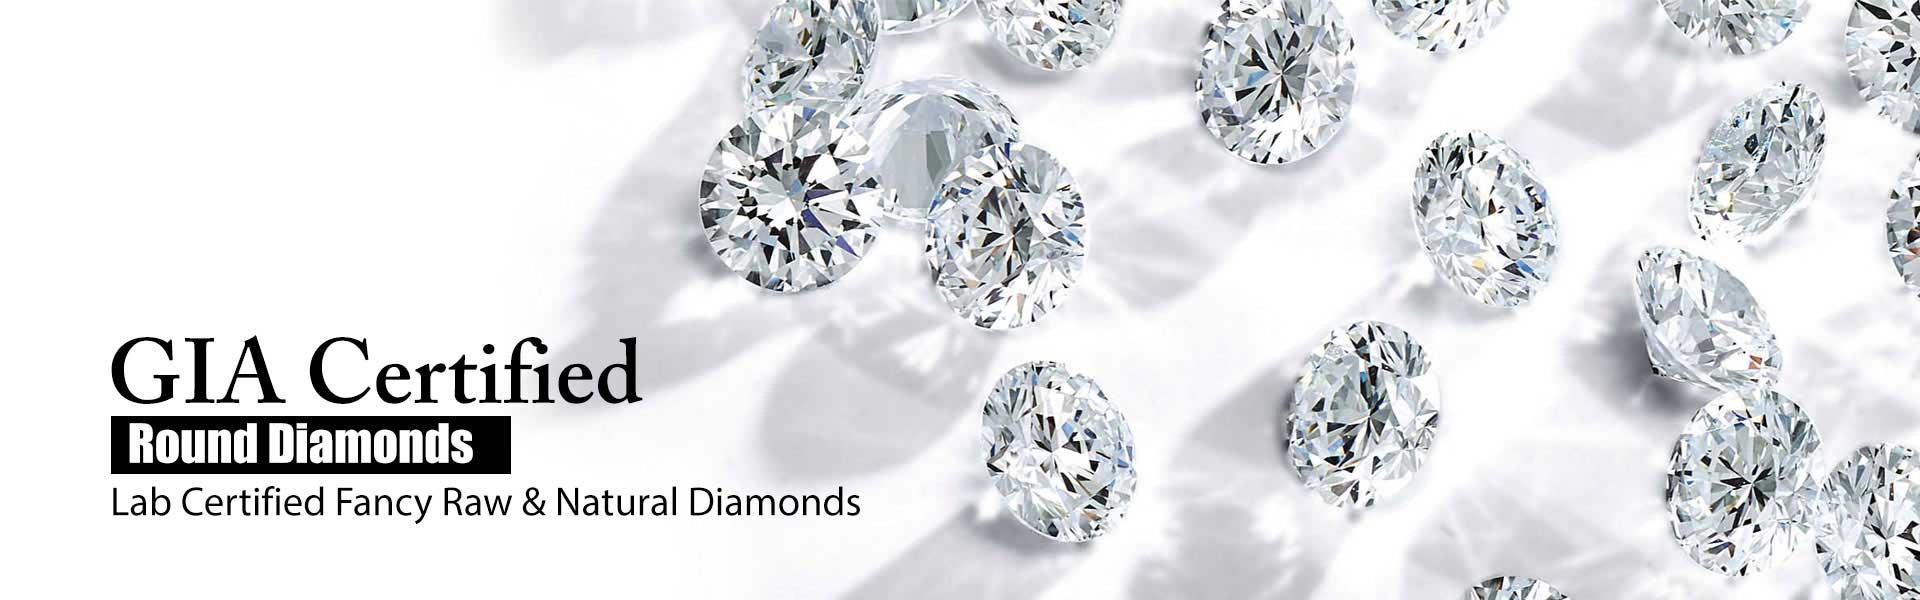  Certified Diamond  Manufacturers in Philippines